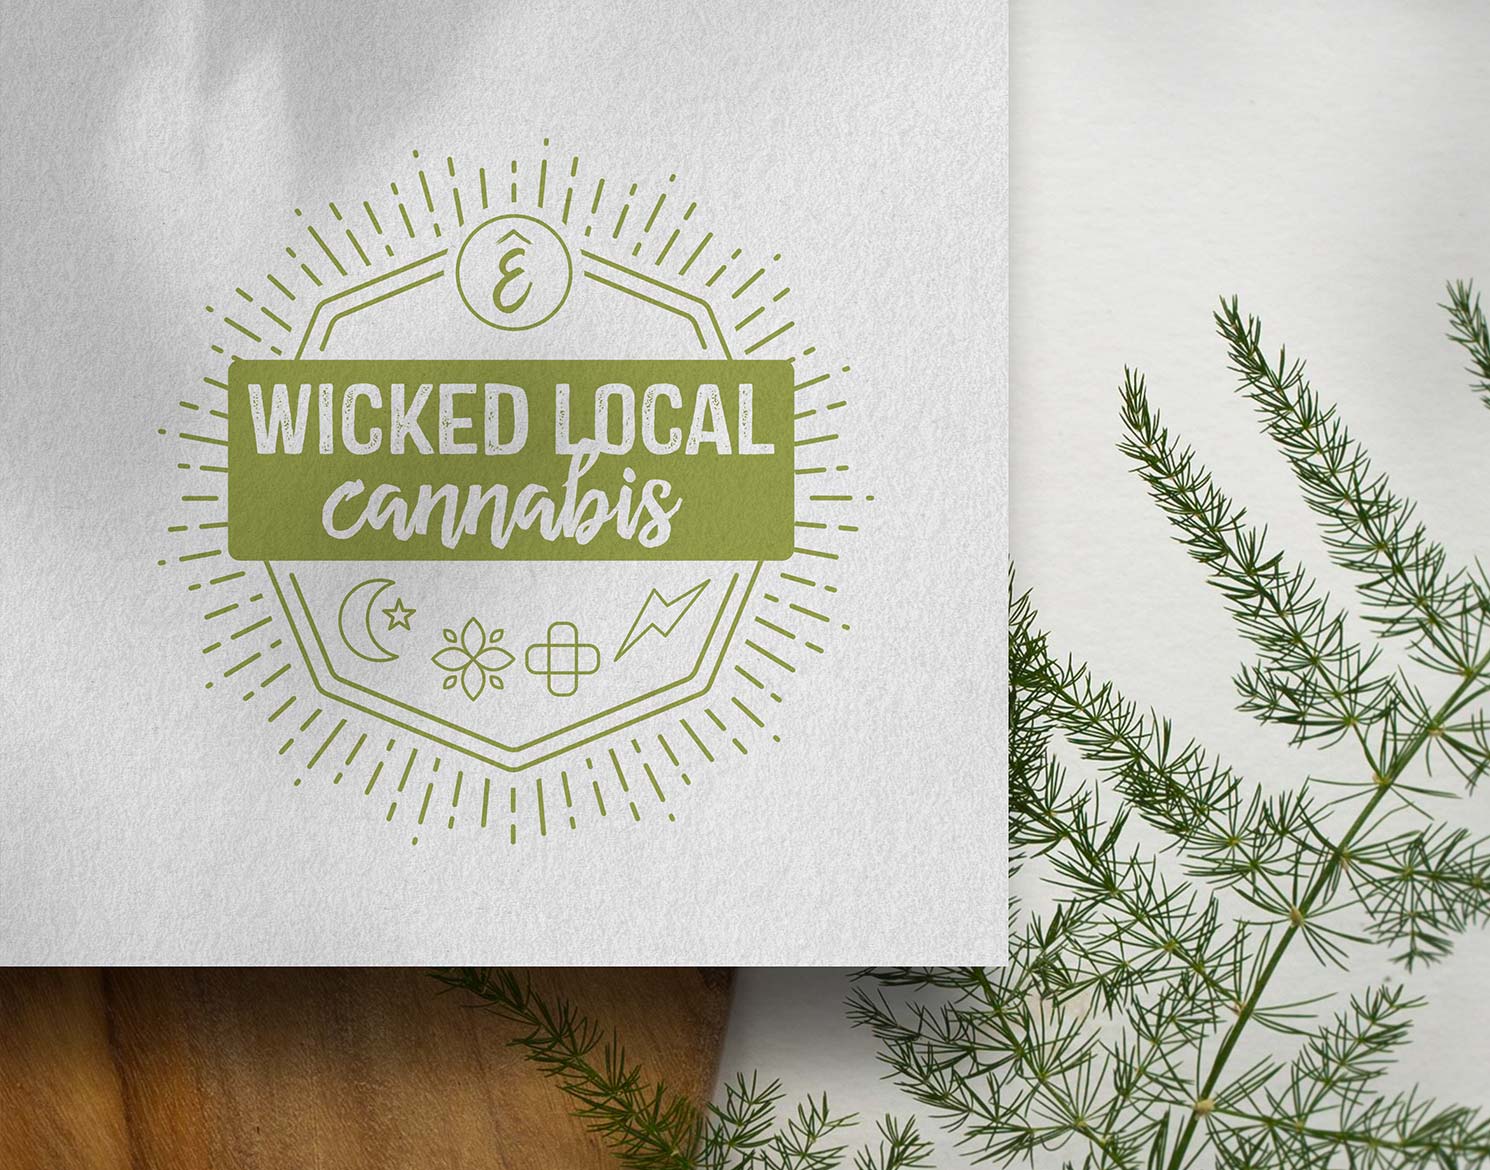 Ermont slogan "Wicked Local Cannabis" printed on paper